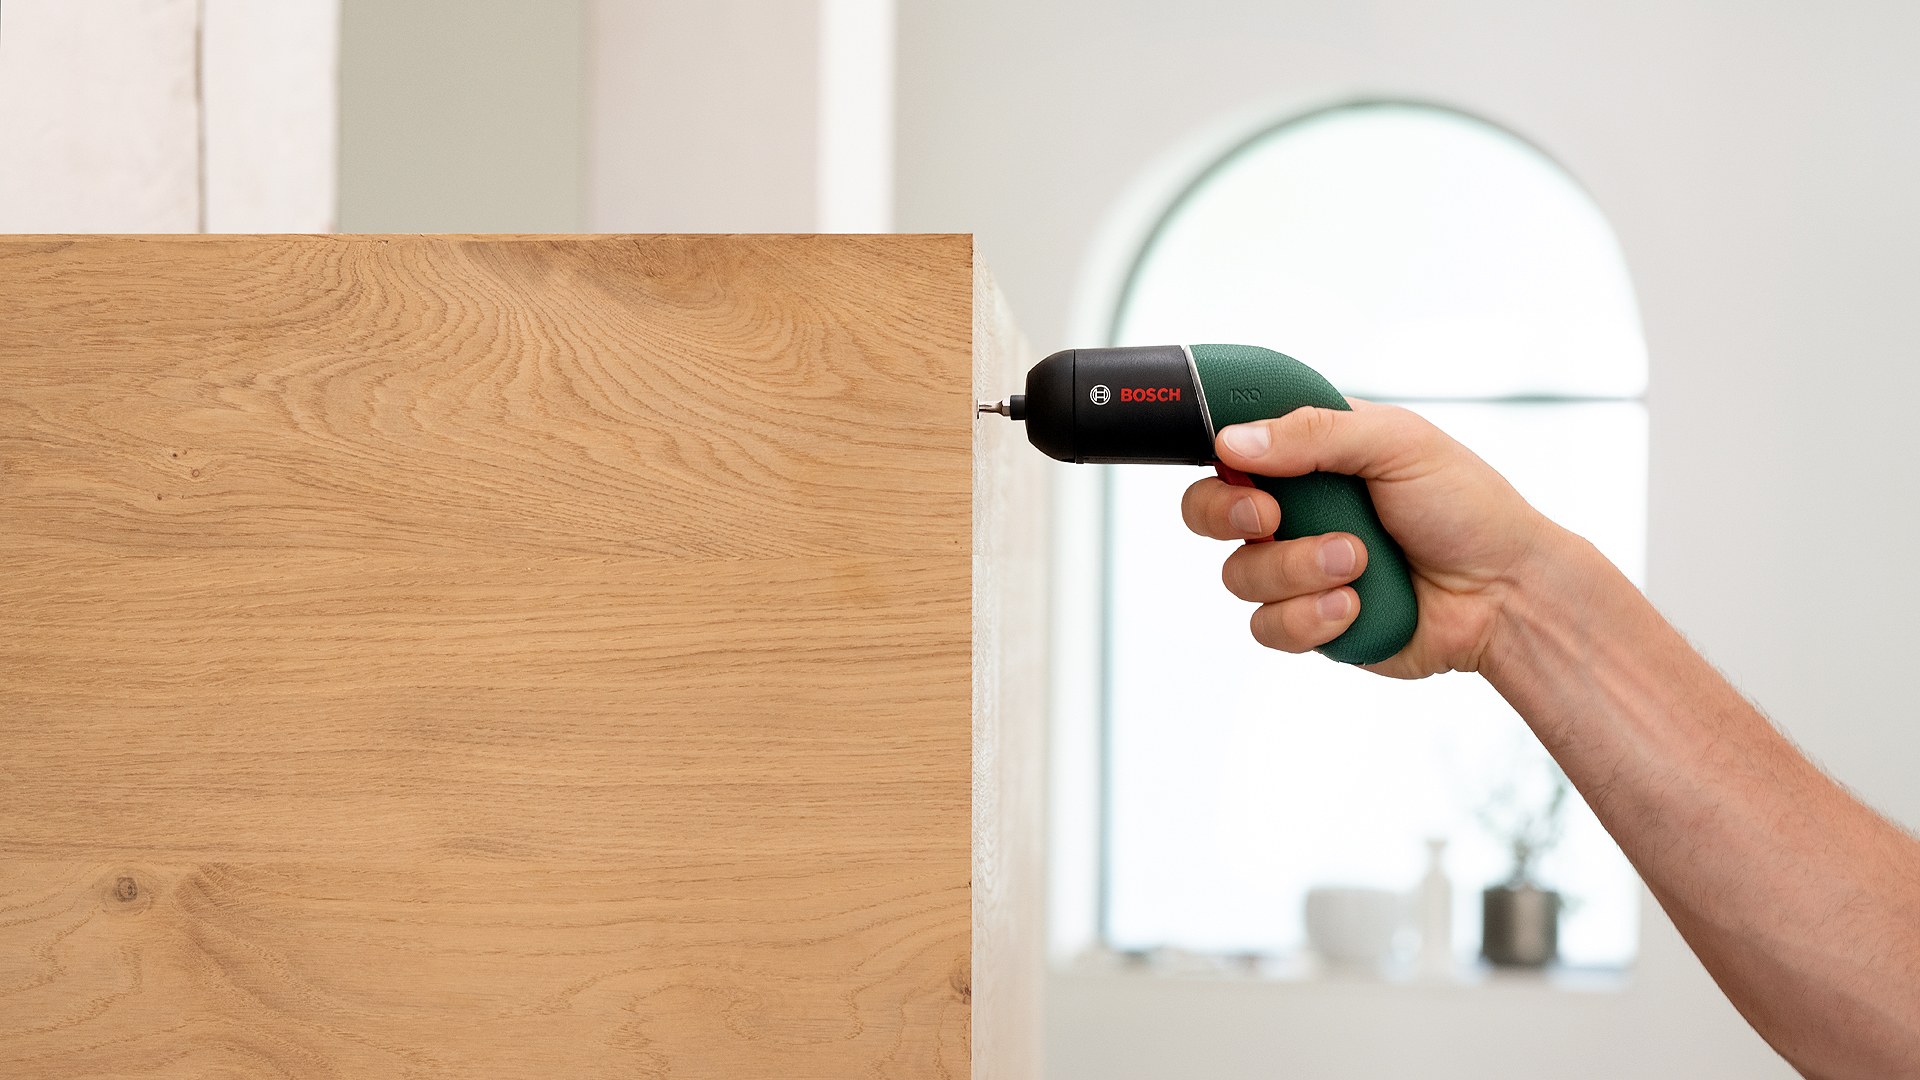 Bosch IXO 6 review: this electric screwdriver may be the most